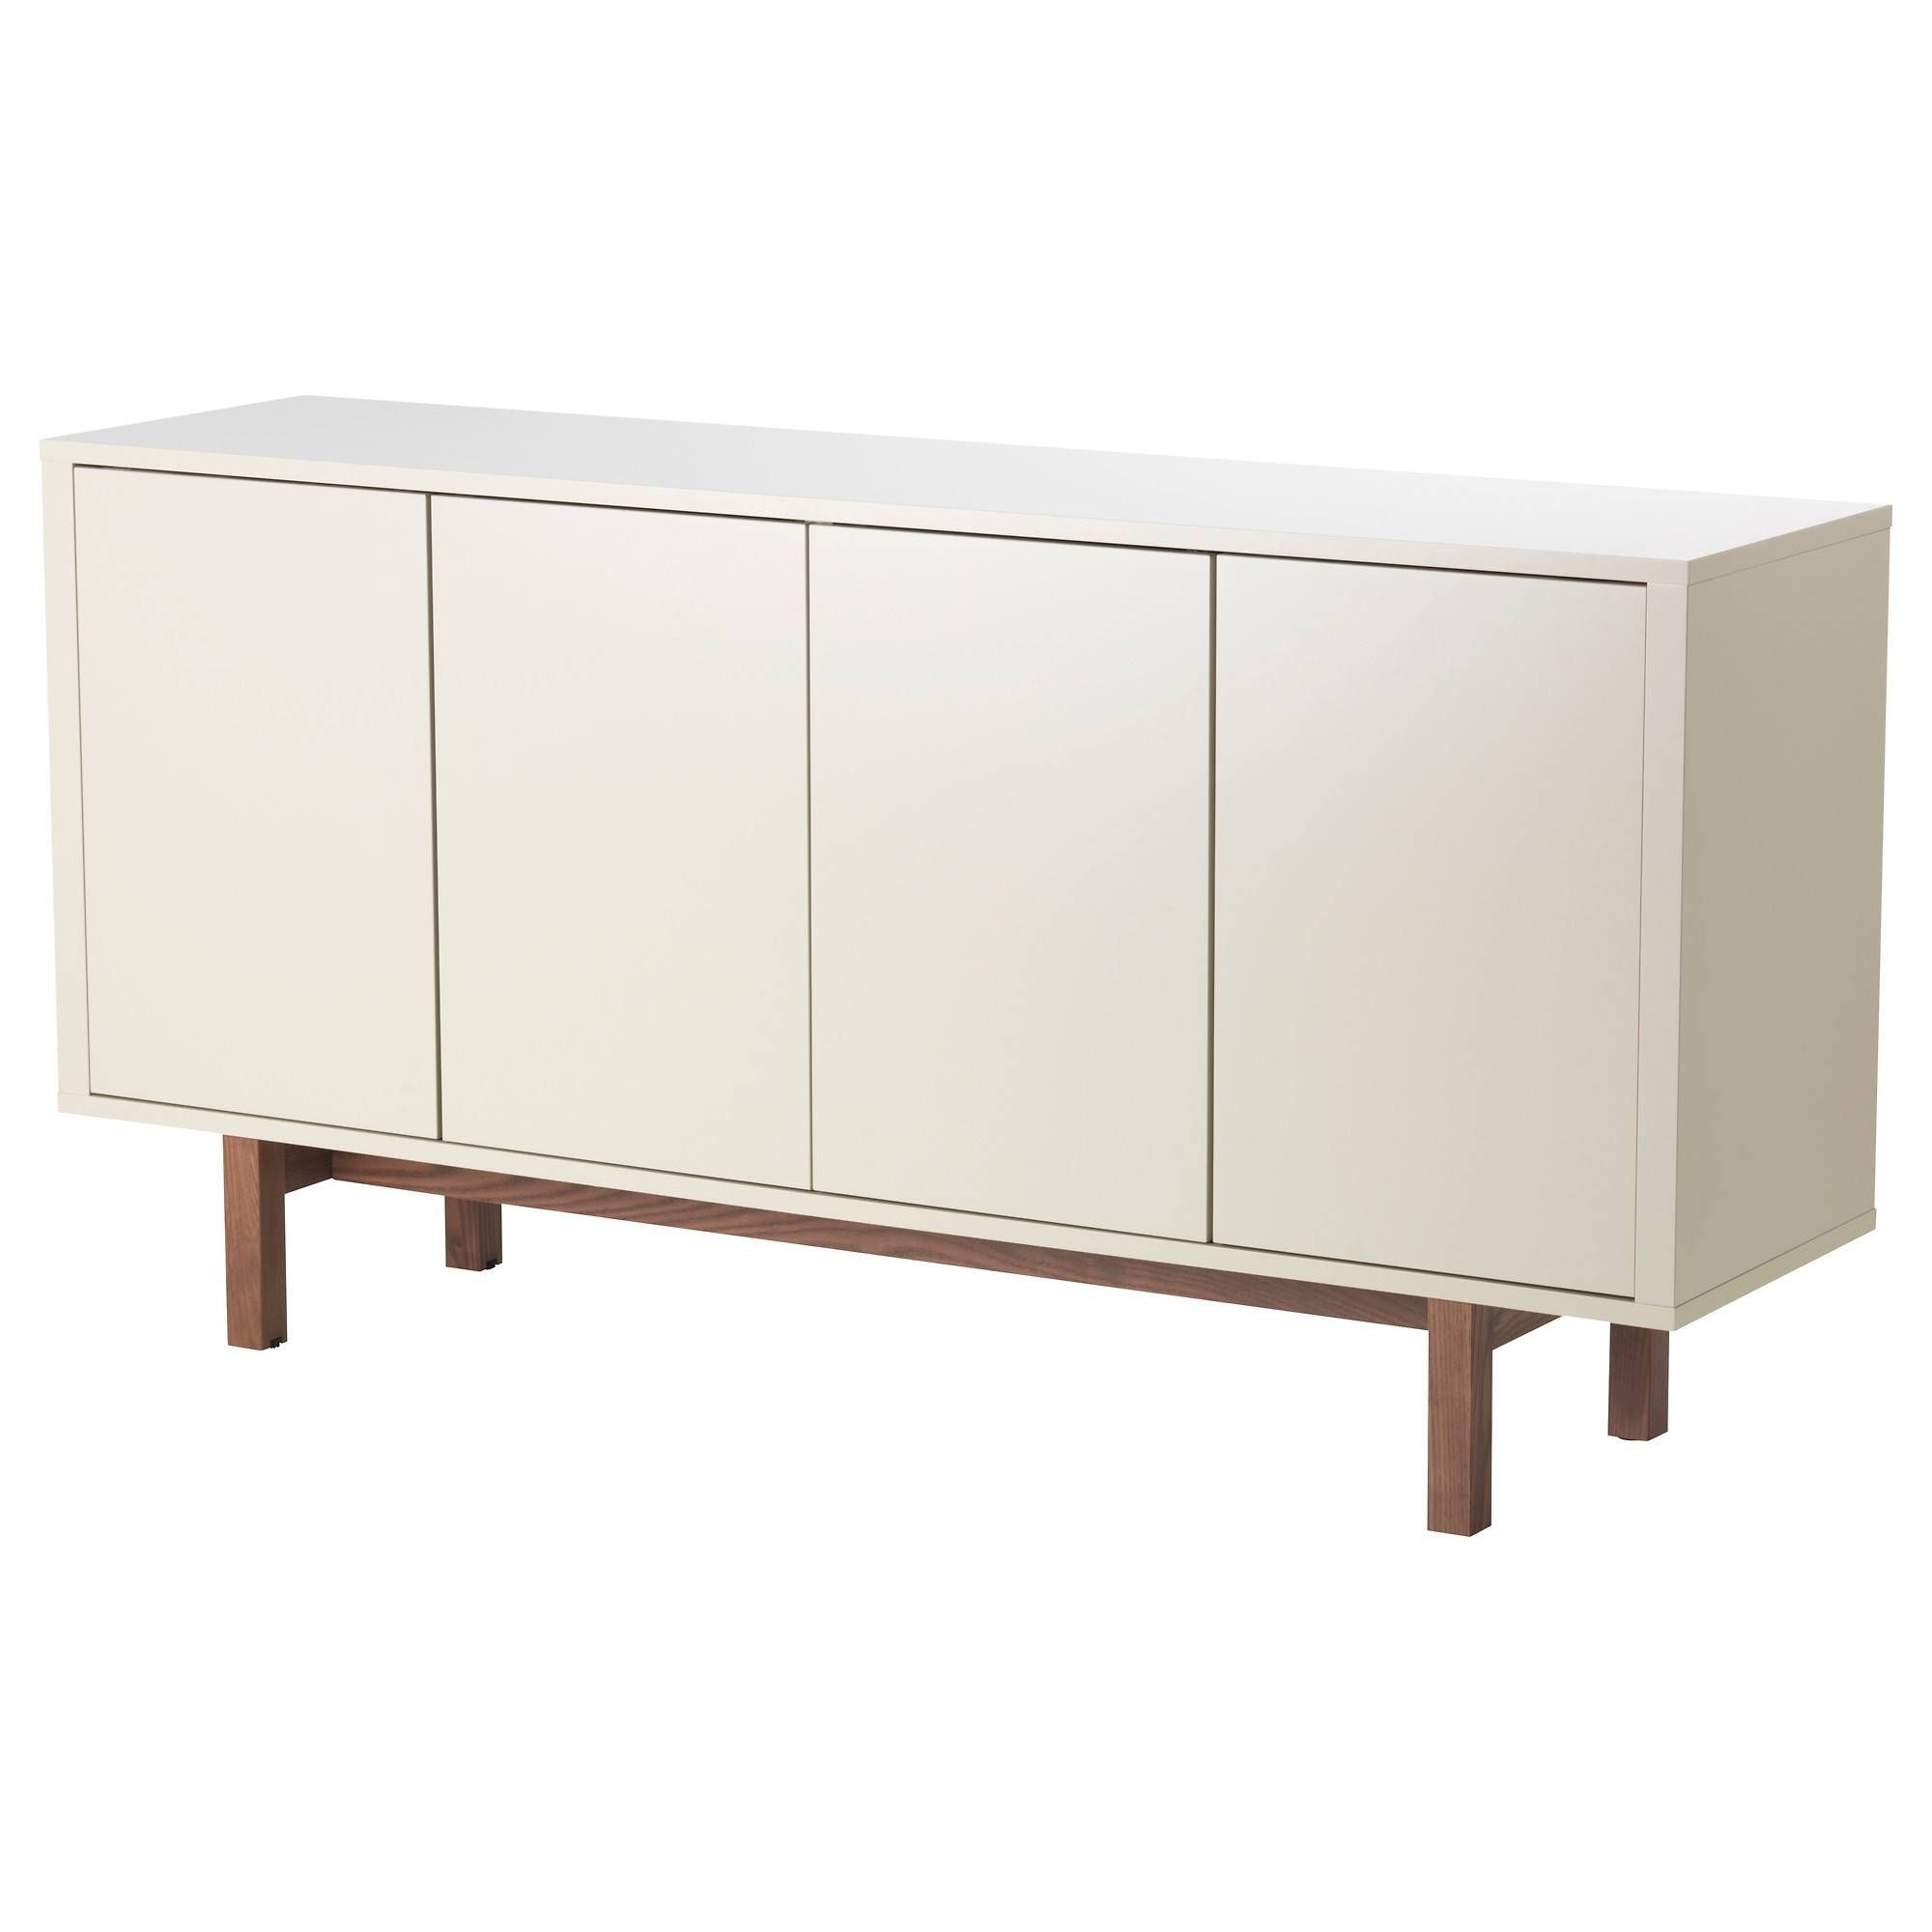 Awesome Ikea Stockholm Sideboard – Bjdgjy Pertaining To Ikea Sideboards (View 7 of 15)